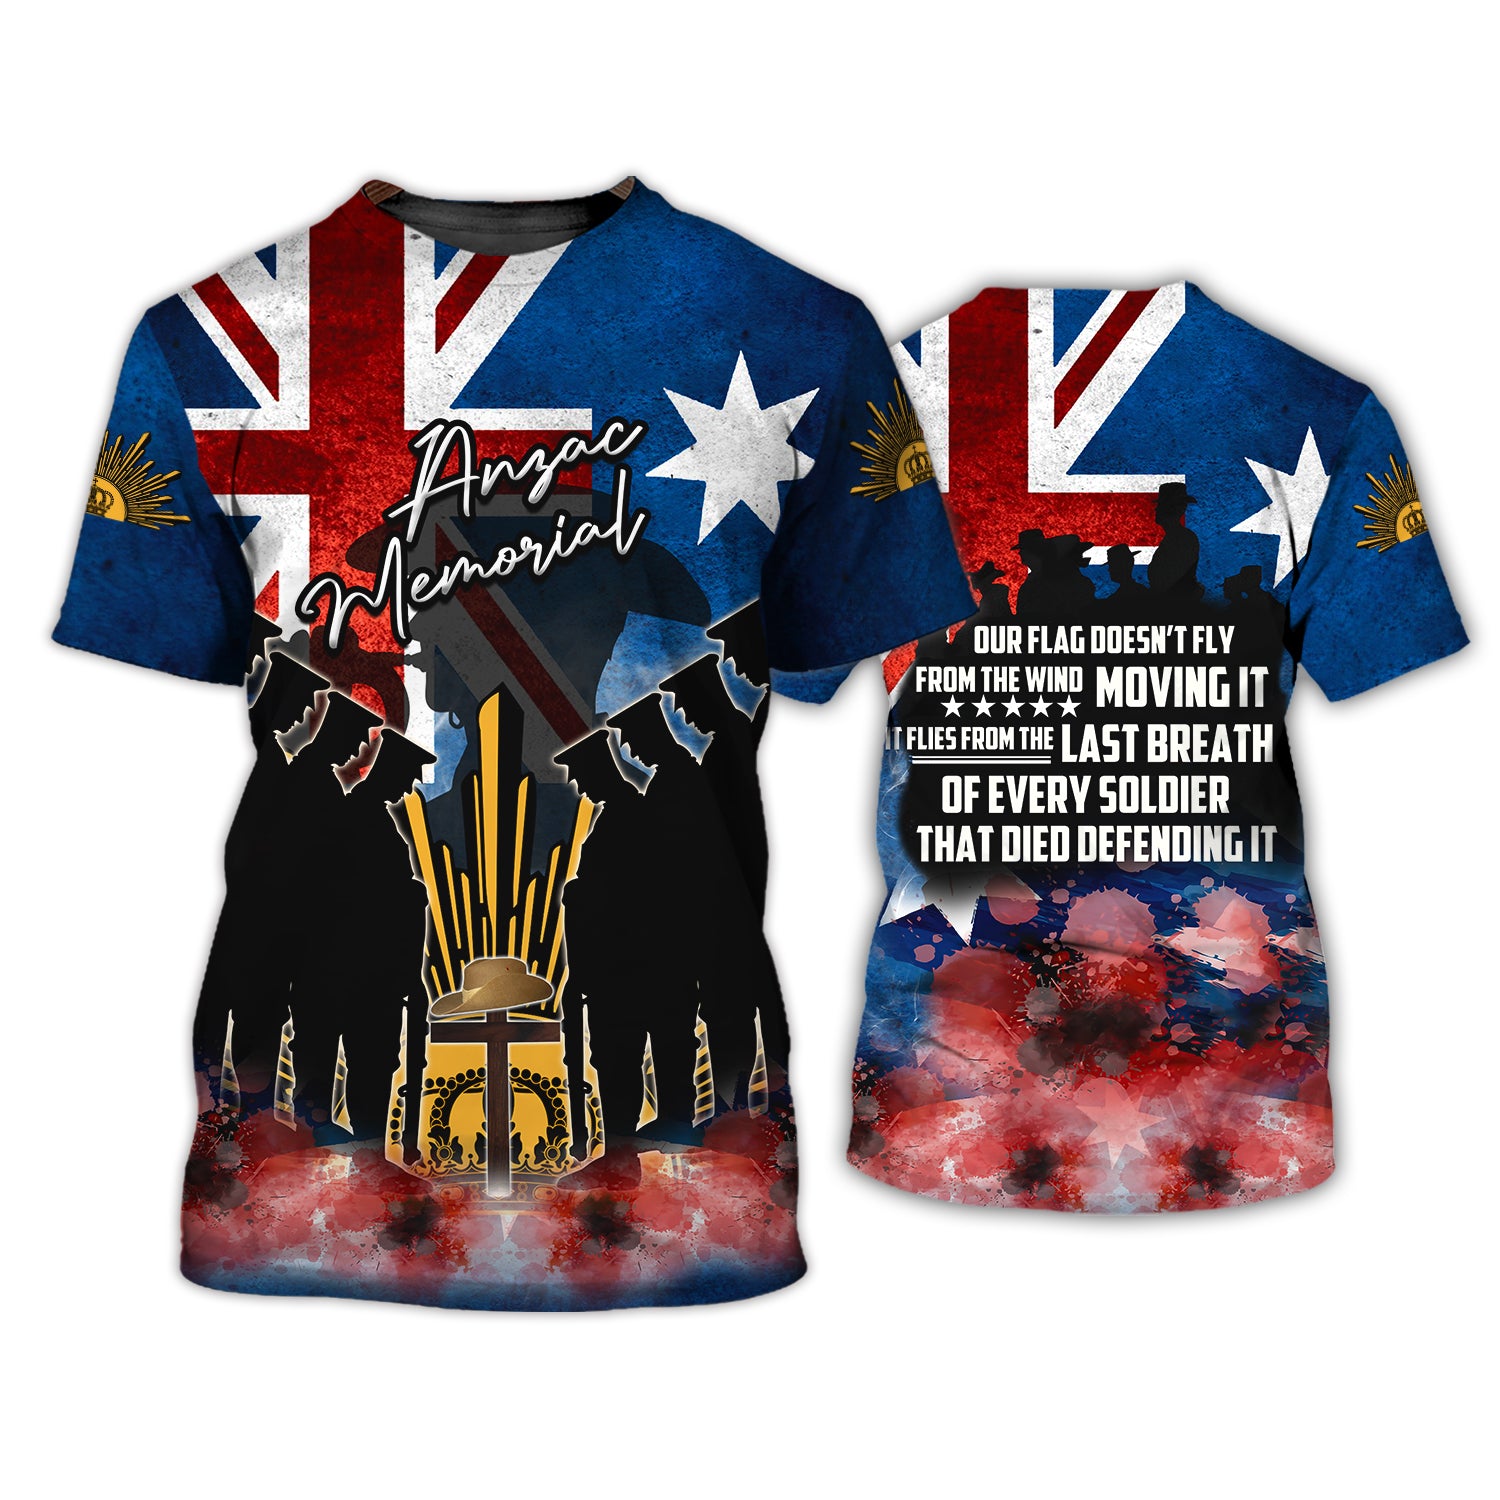 Anzac Day 25 April, Lest We Forget, Anzac Memorial 3D Tshirt 363, Nsd99